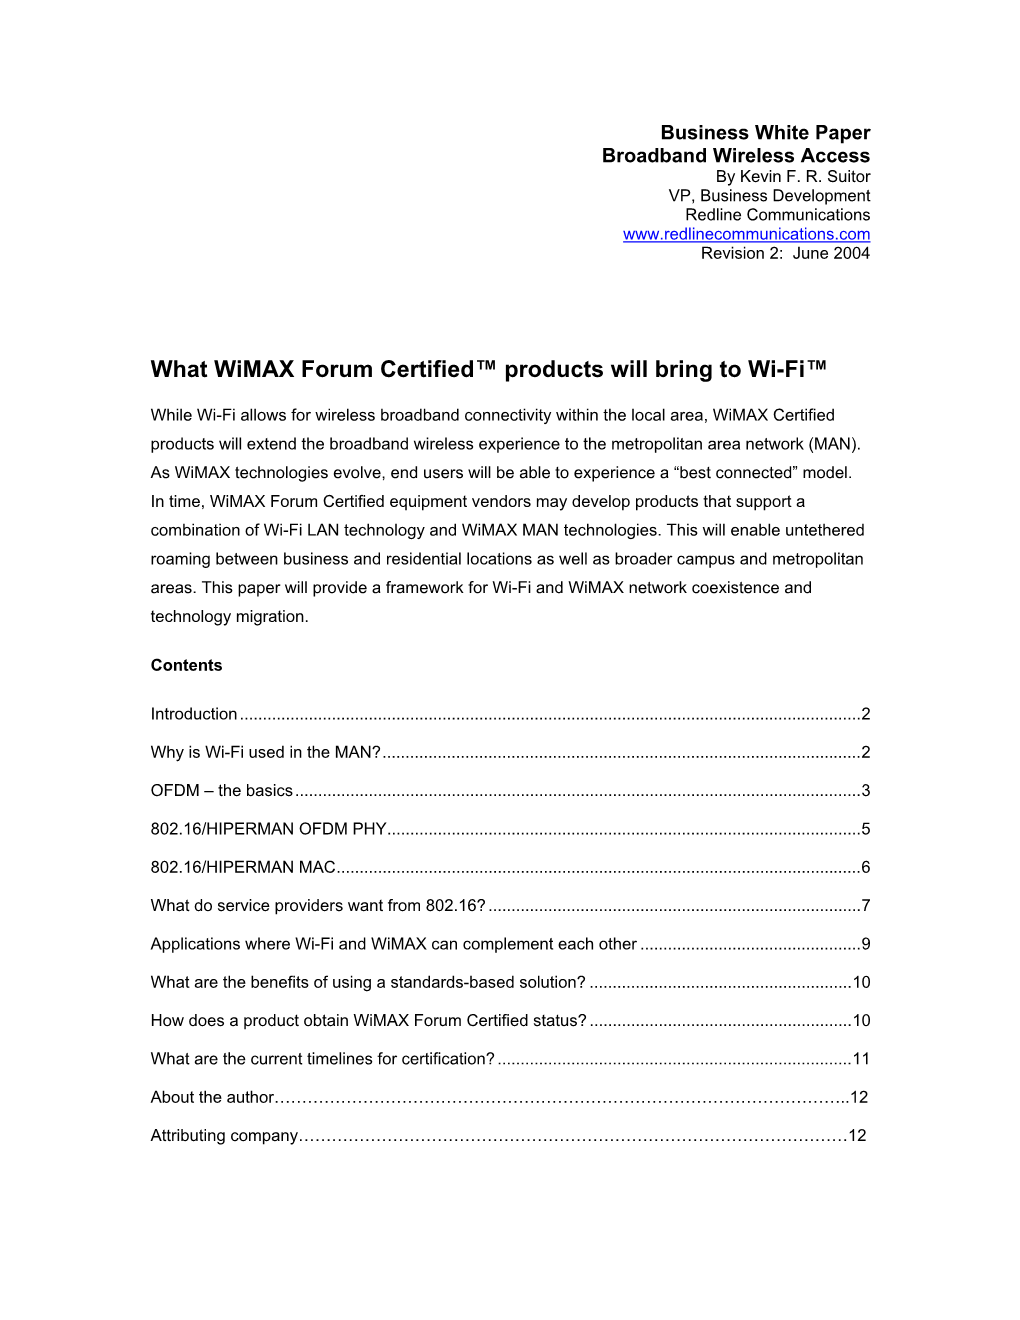 What Wimax Forum Certified™ Products Will Bring to Wi-Fi™